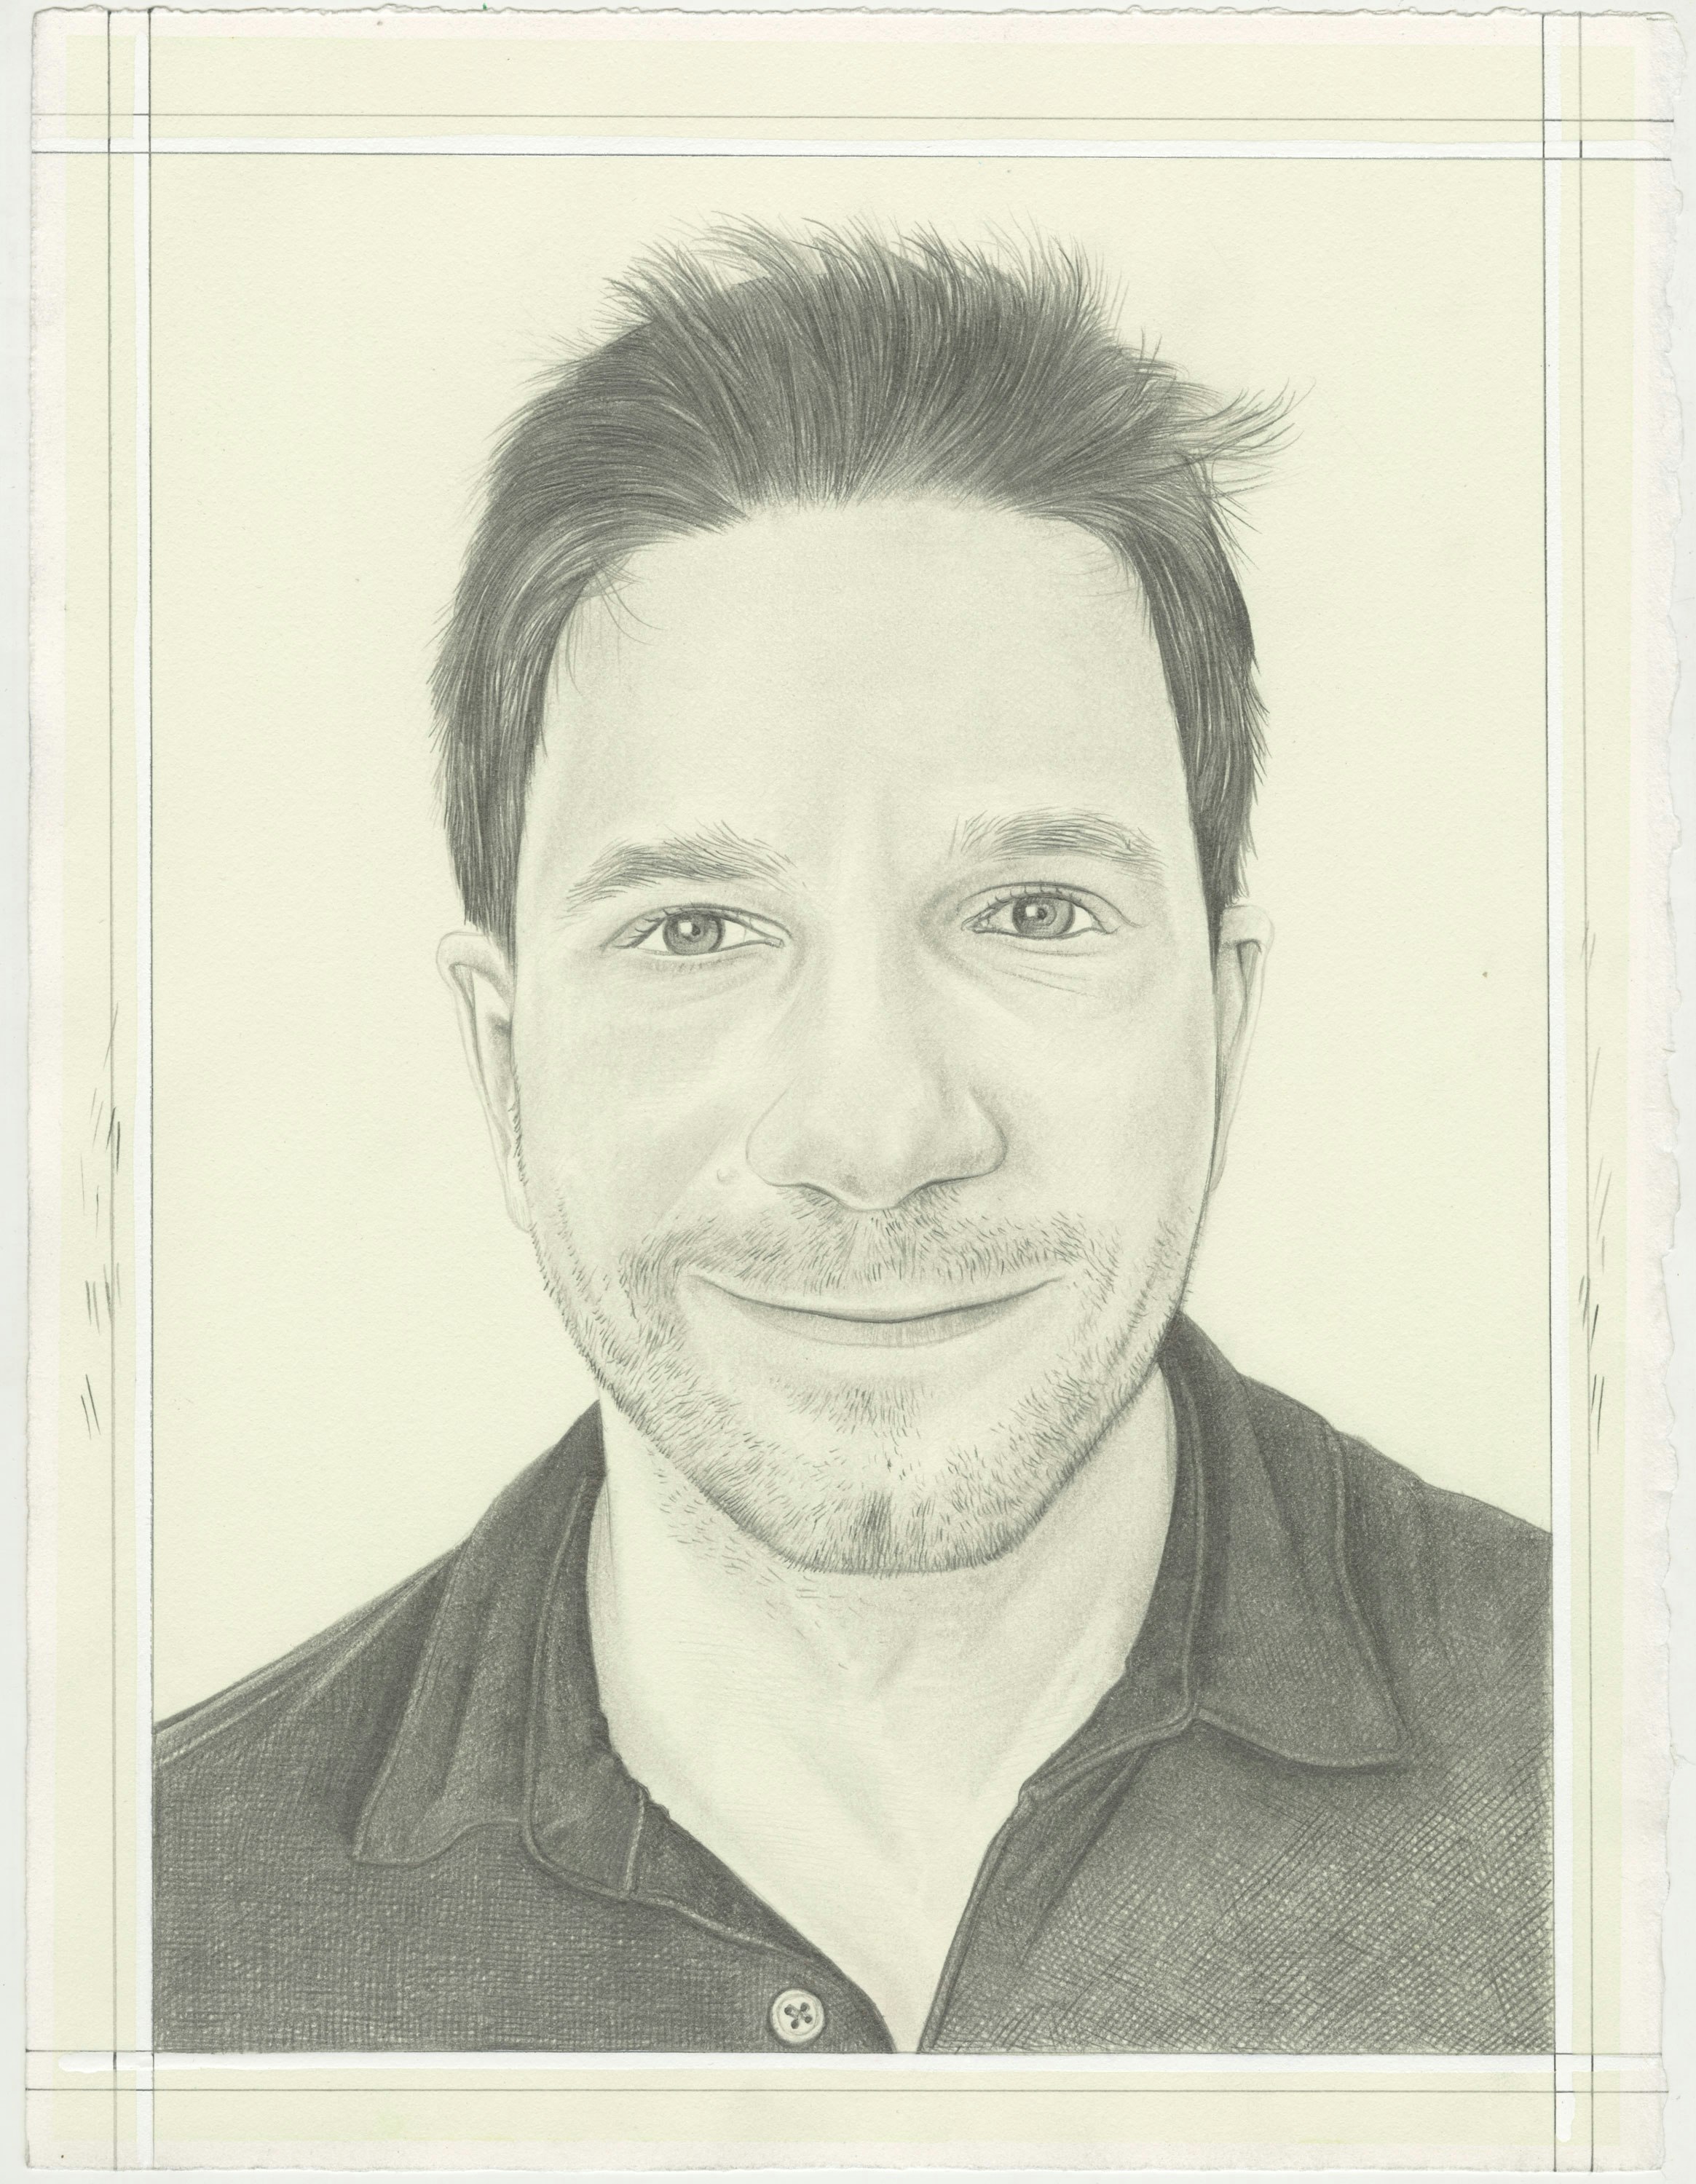 Christian K. Kleinbub, pencil on paper by Phong H. Bui